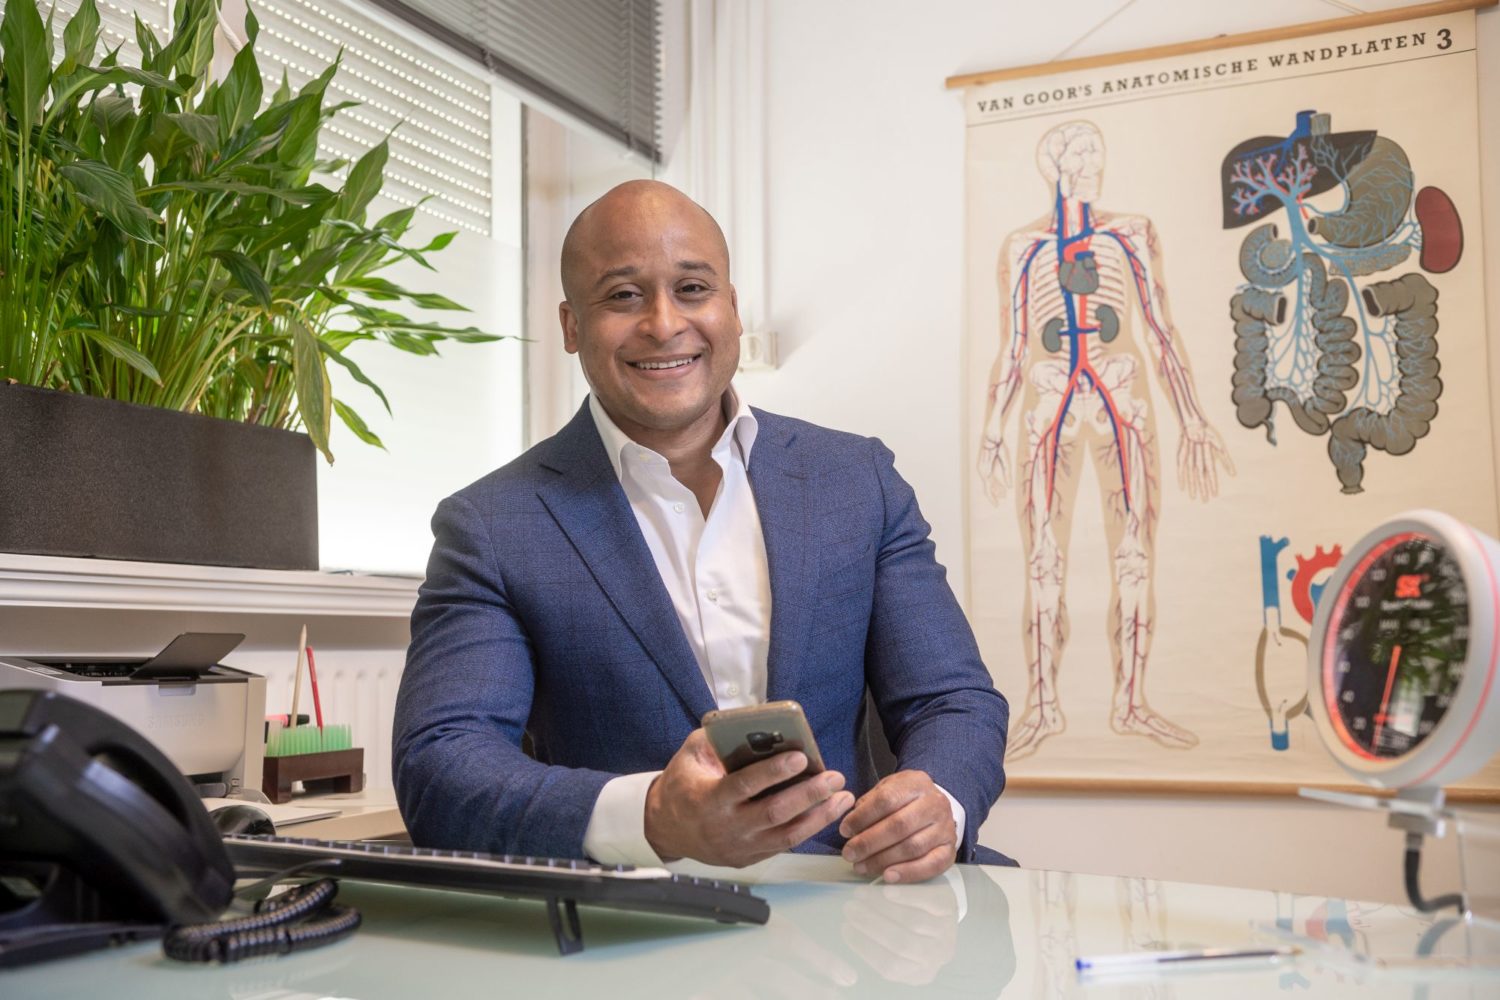 Coachjezelf aims to contribute to digital transformation in healthcare